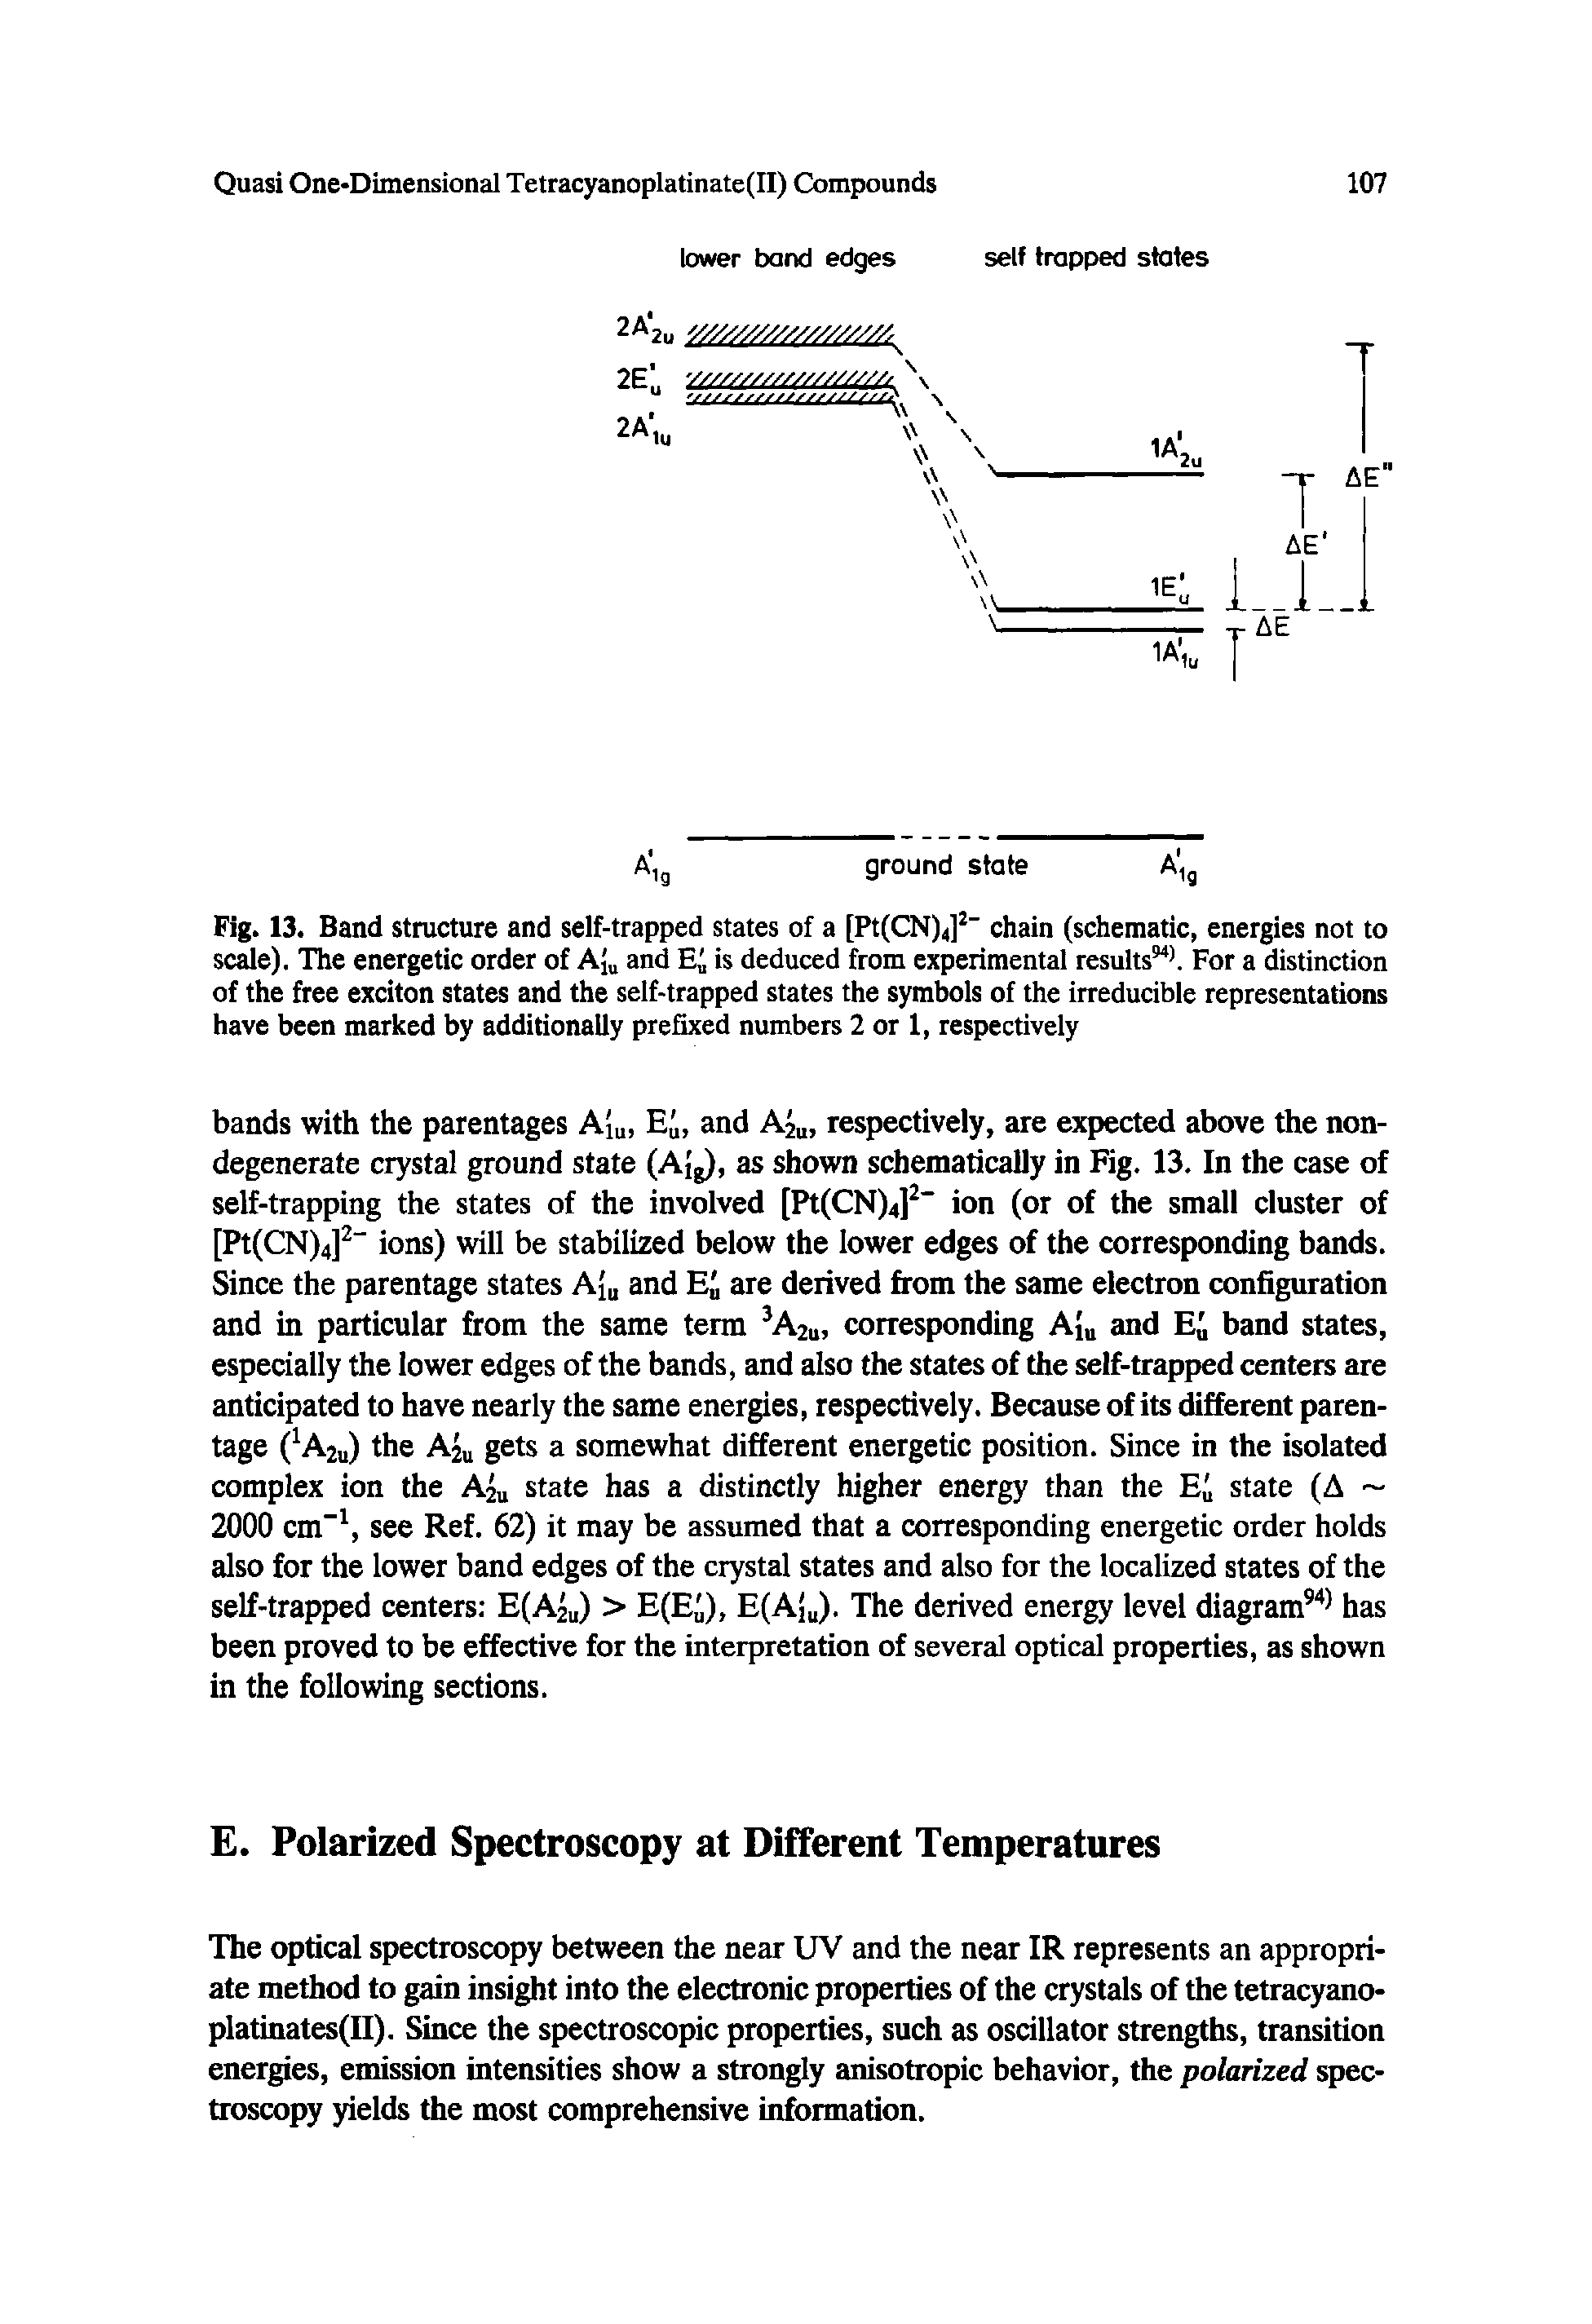 Fig. 13. Band structure and self-trapped states of a [Pt(CN)4]2- chain (schematic, energies not to scale). The energetic order of AJU and Ei is deduced from experimental results94. For a distinction of the free exciton states and the self-trapped states the symbols of the irreducible representations have been marked by additionally prefixed numbers 2 or 1, respectively...